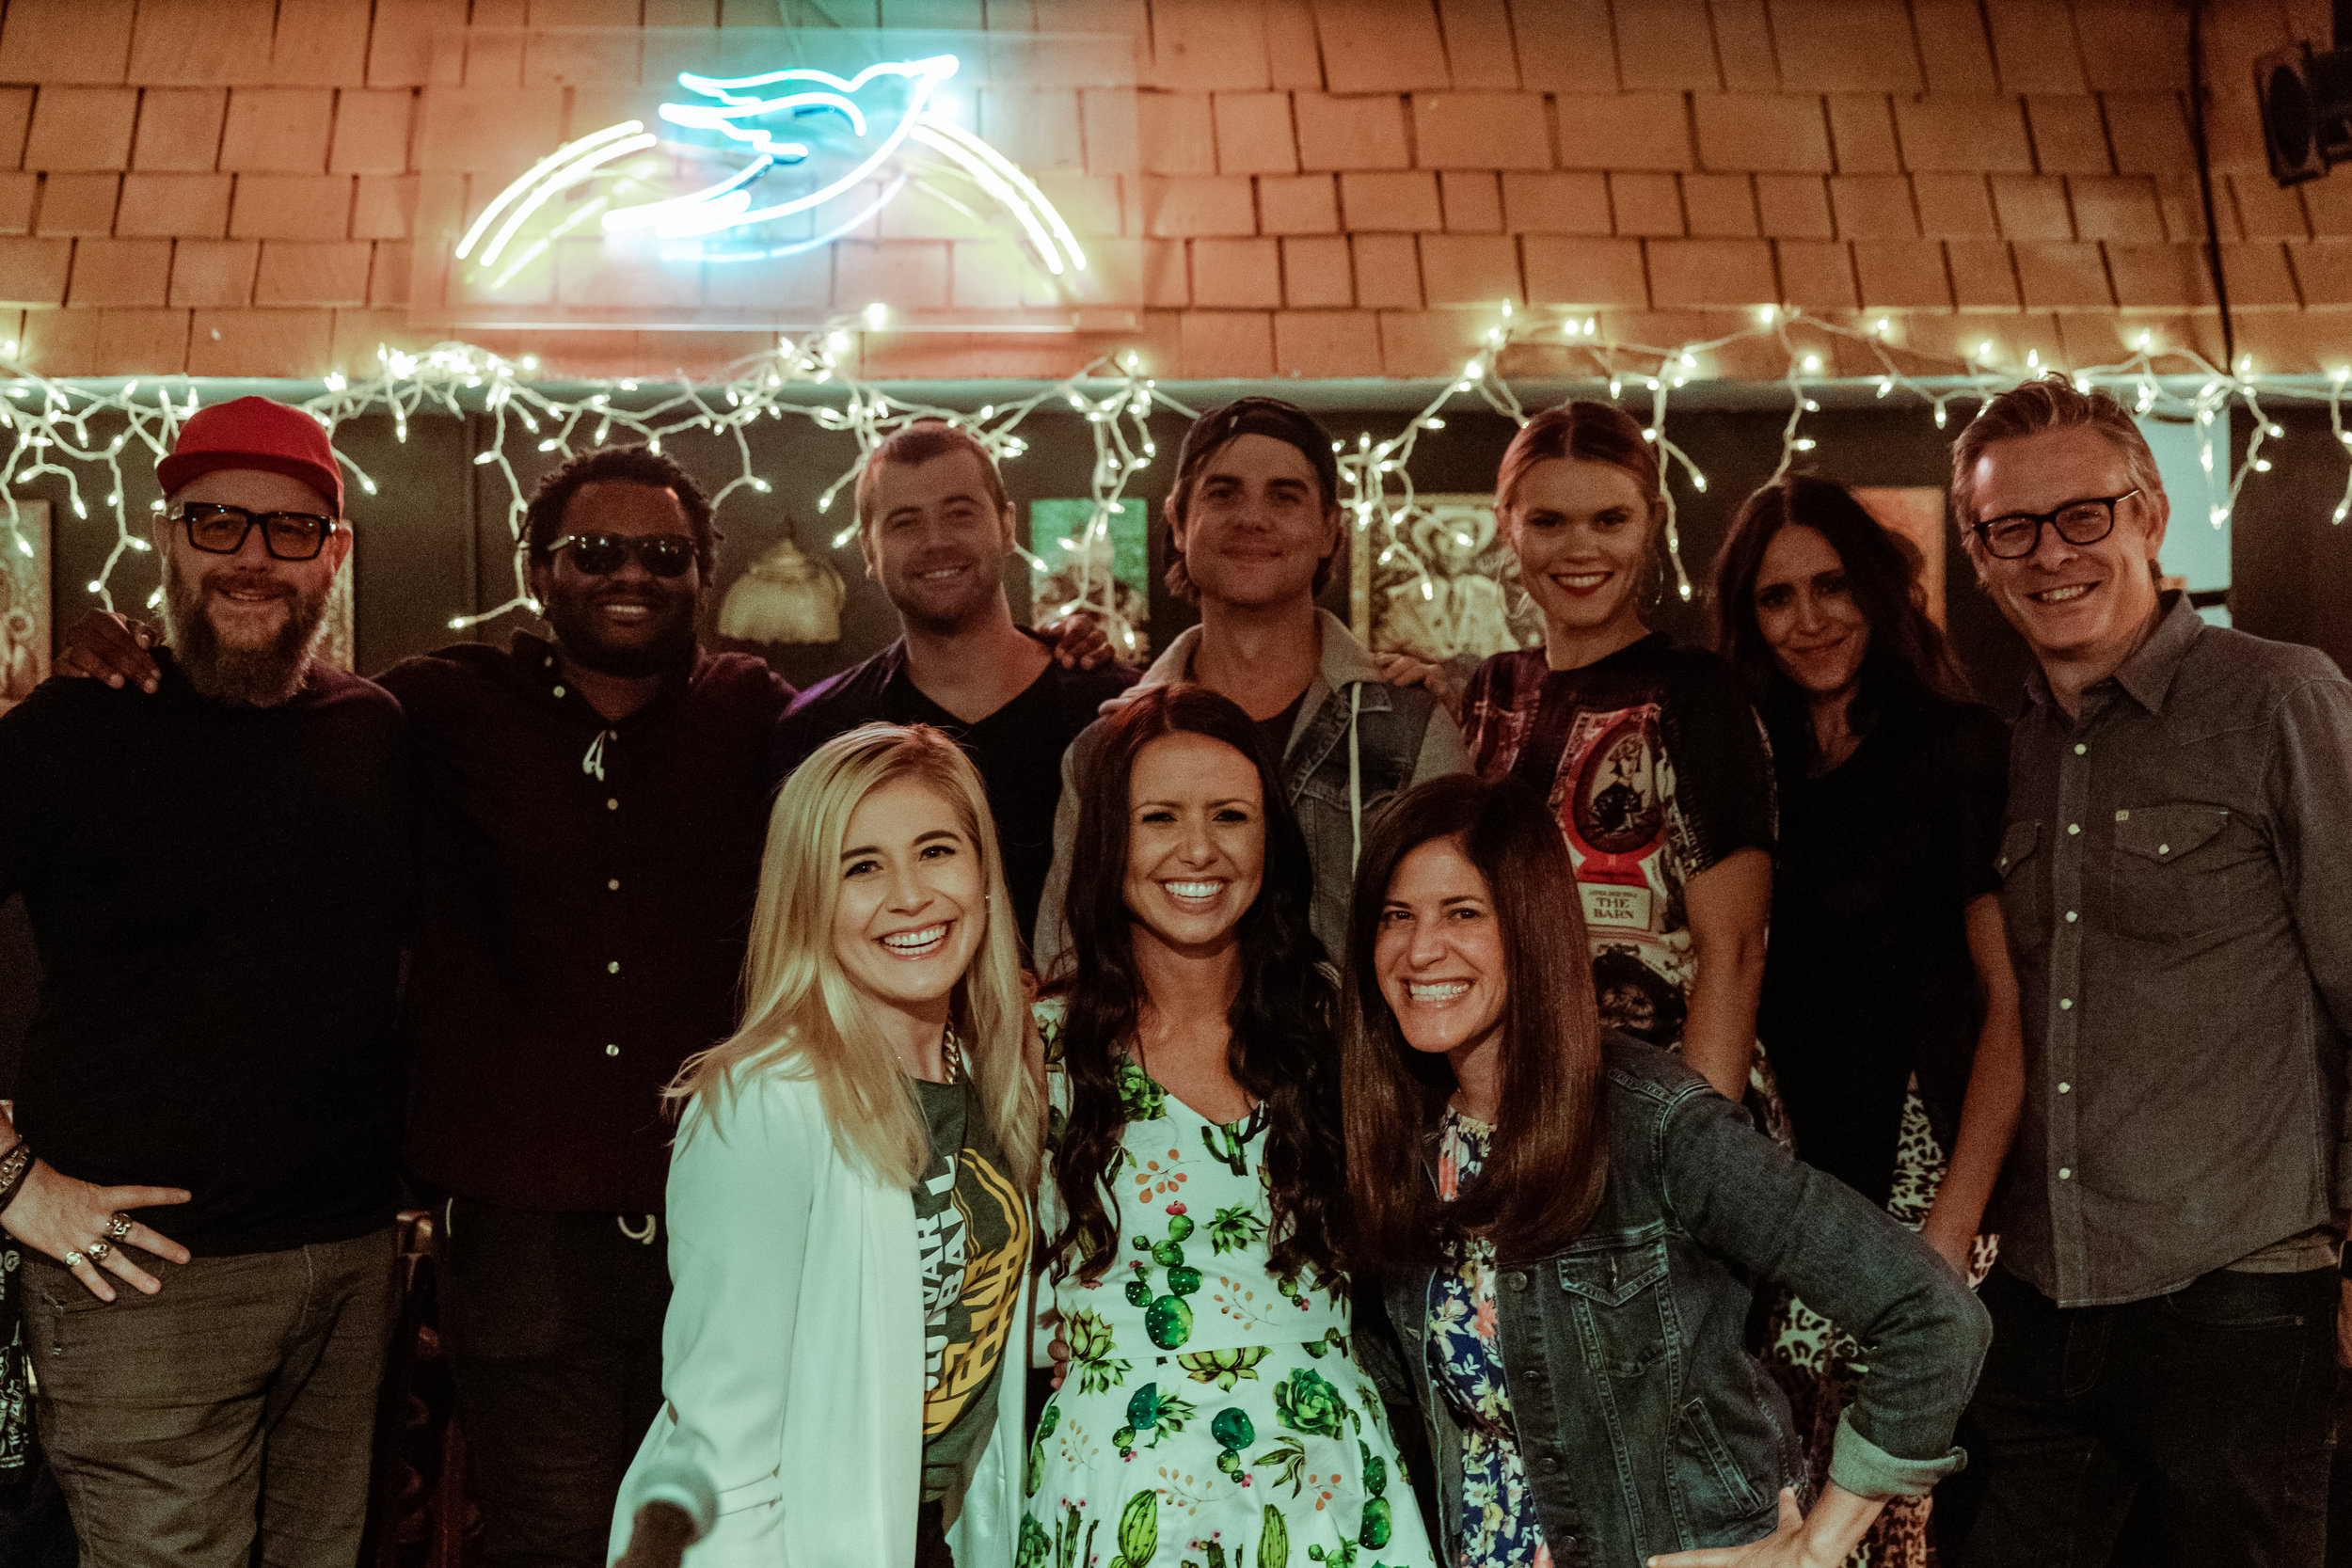  F. Reid Shippen, Blessing Offor, Jimmy Robbins, Ross Copperman, Nicolle Galyon, Kelleigh Bannen, Henry Donahue (Save the Music), Alena Moran, Rachel Malone, Danielle Zalaznick (Save the Music) 